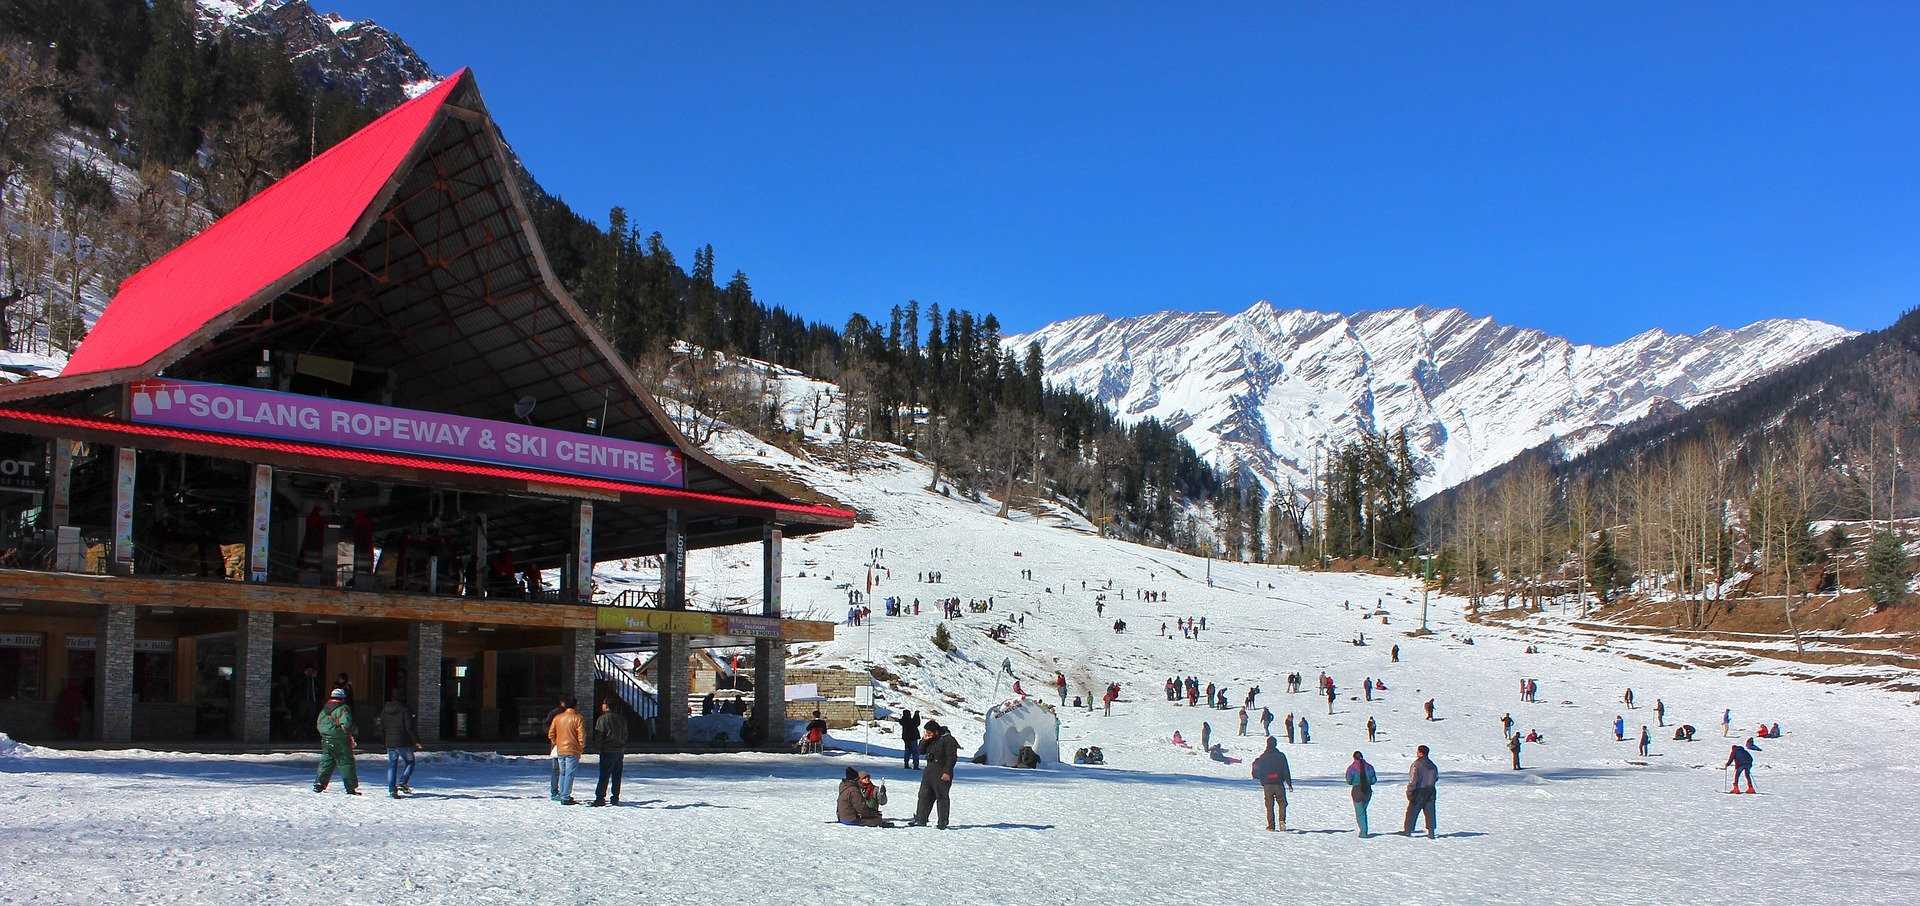 himachal land tour packages